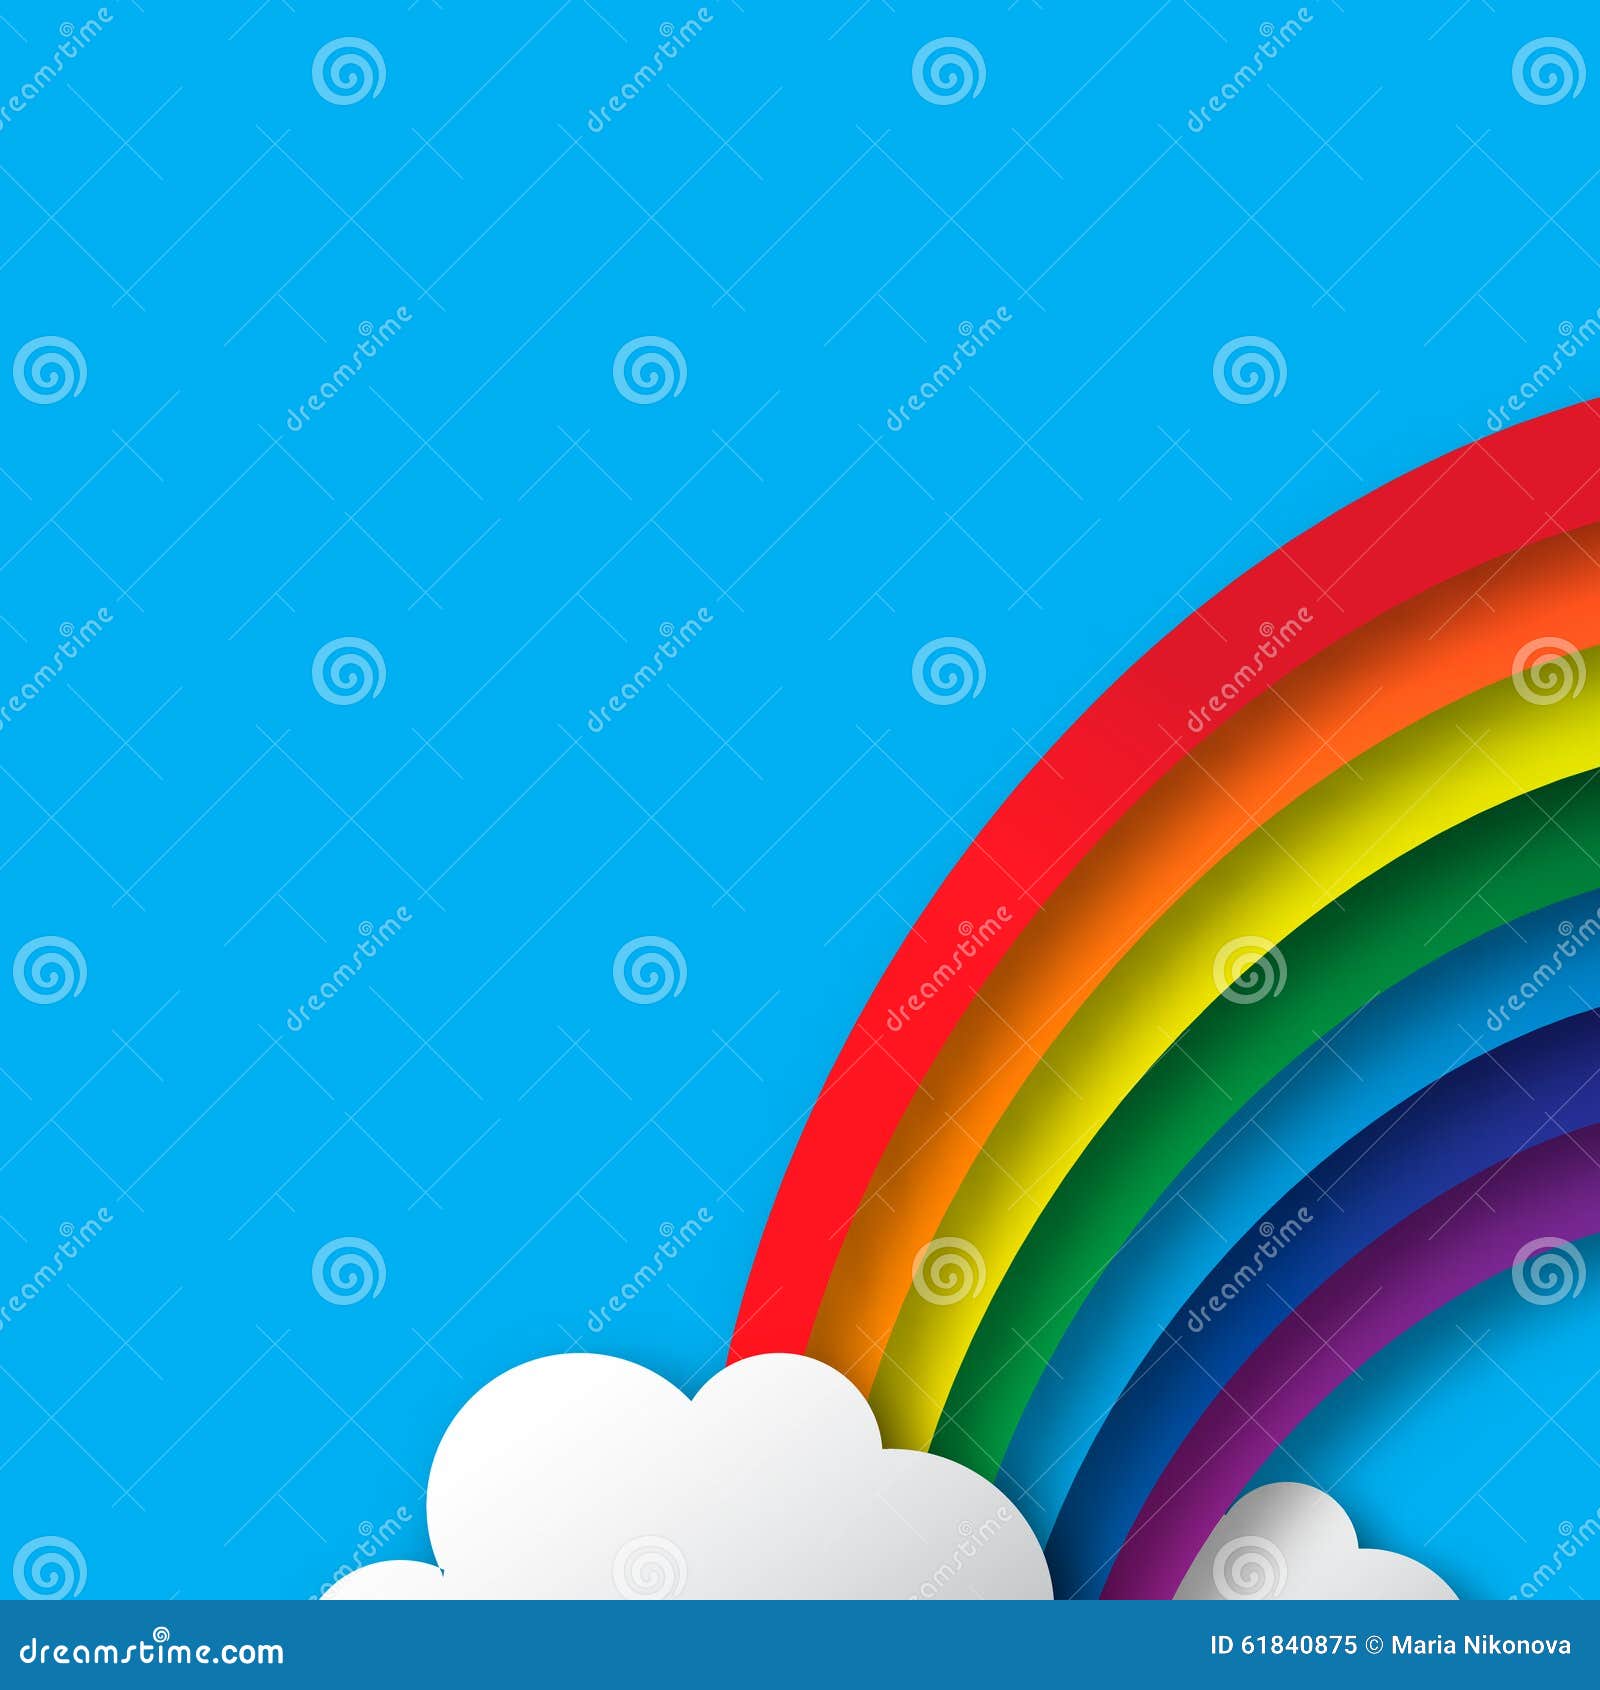 Rainbow Colorful Circles Stock Vector Illustration Of Multicolored